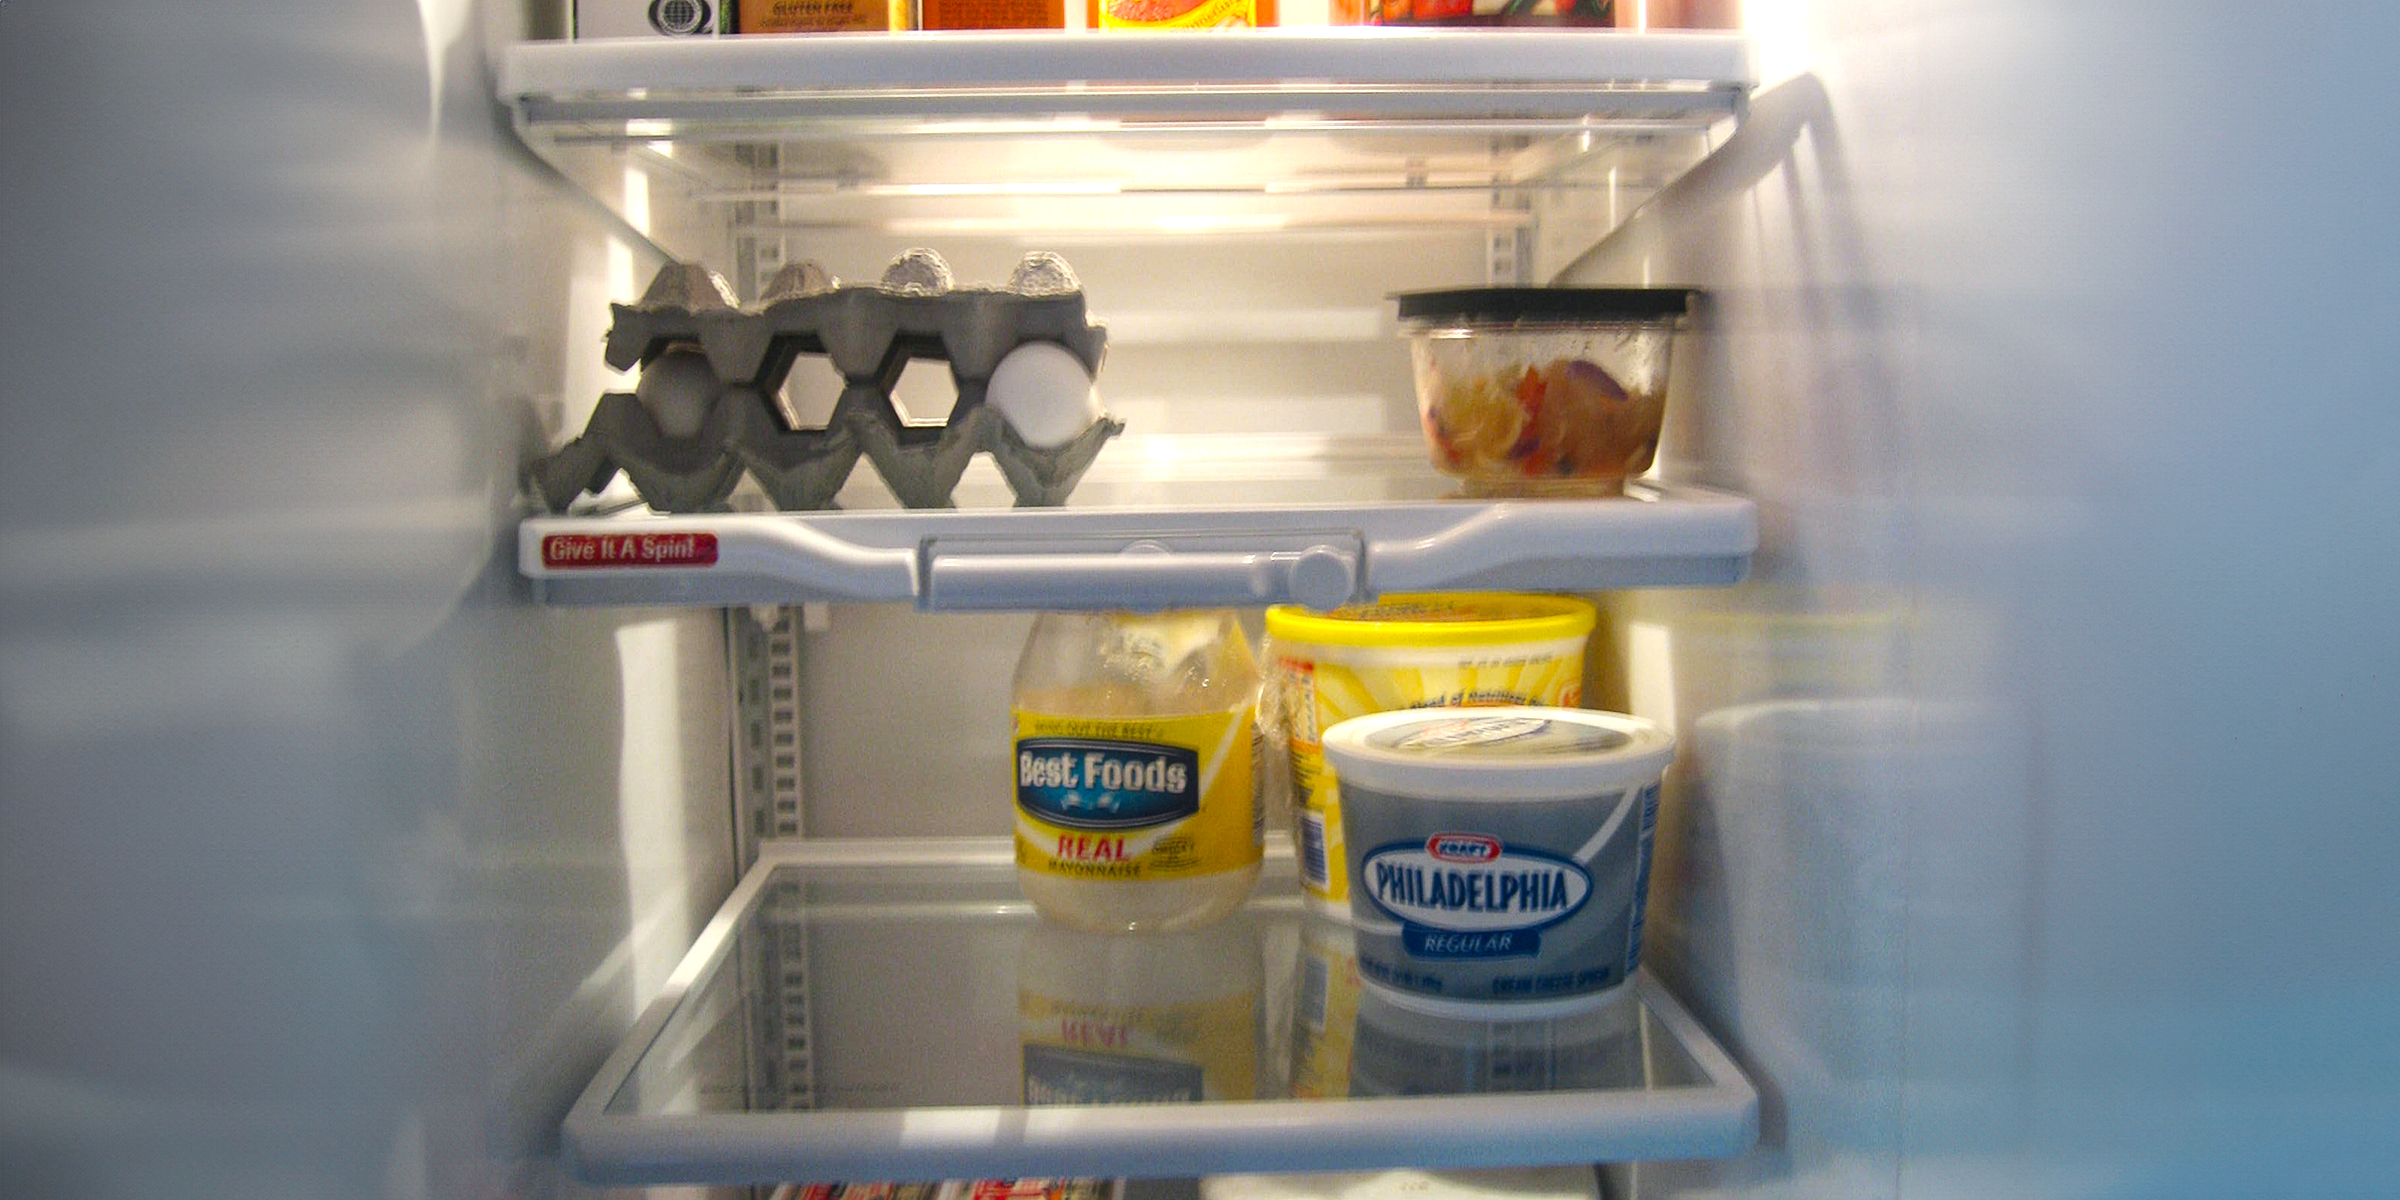 The contents of a refrigerator | Source: Flickr